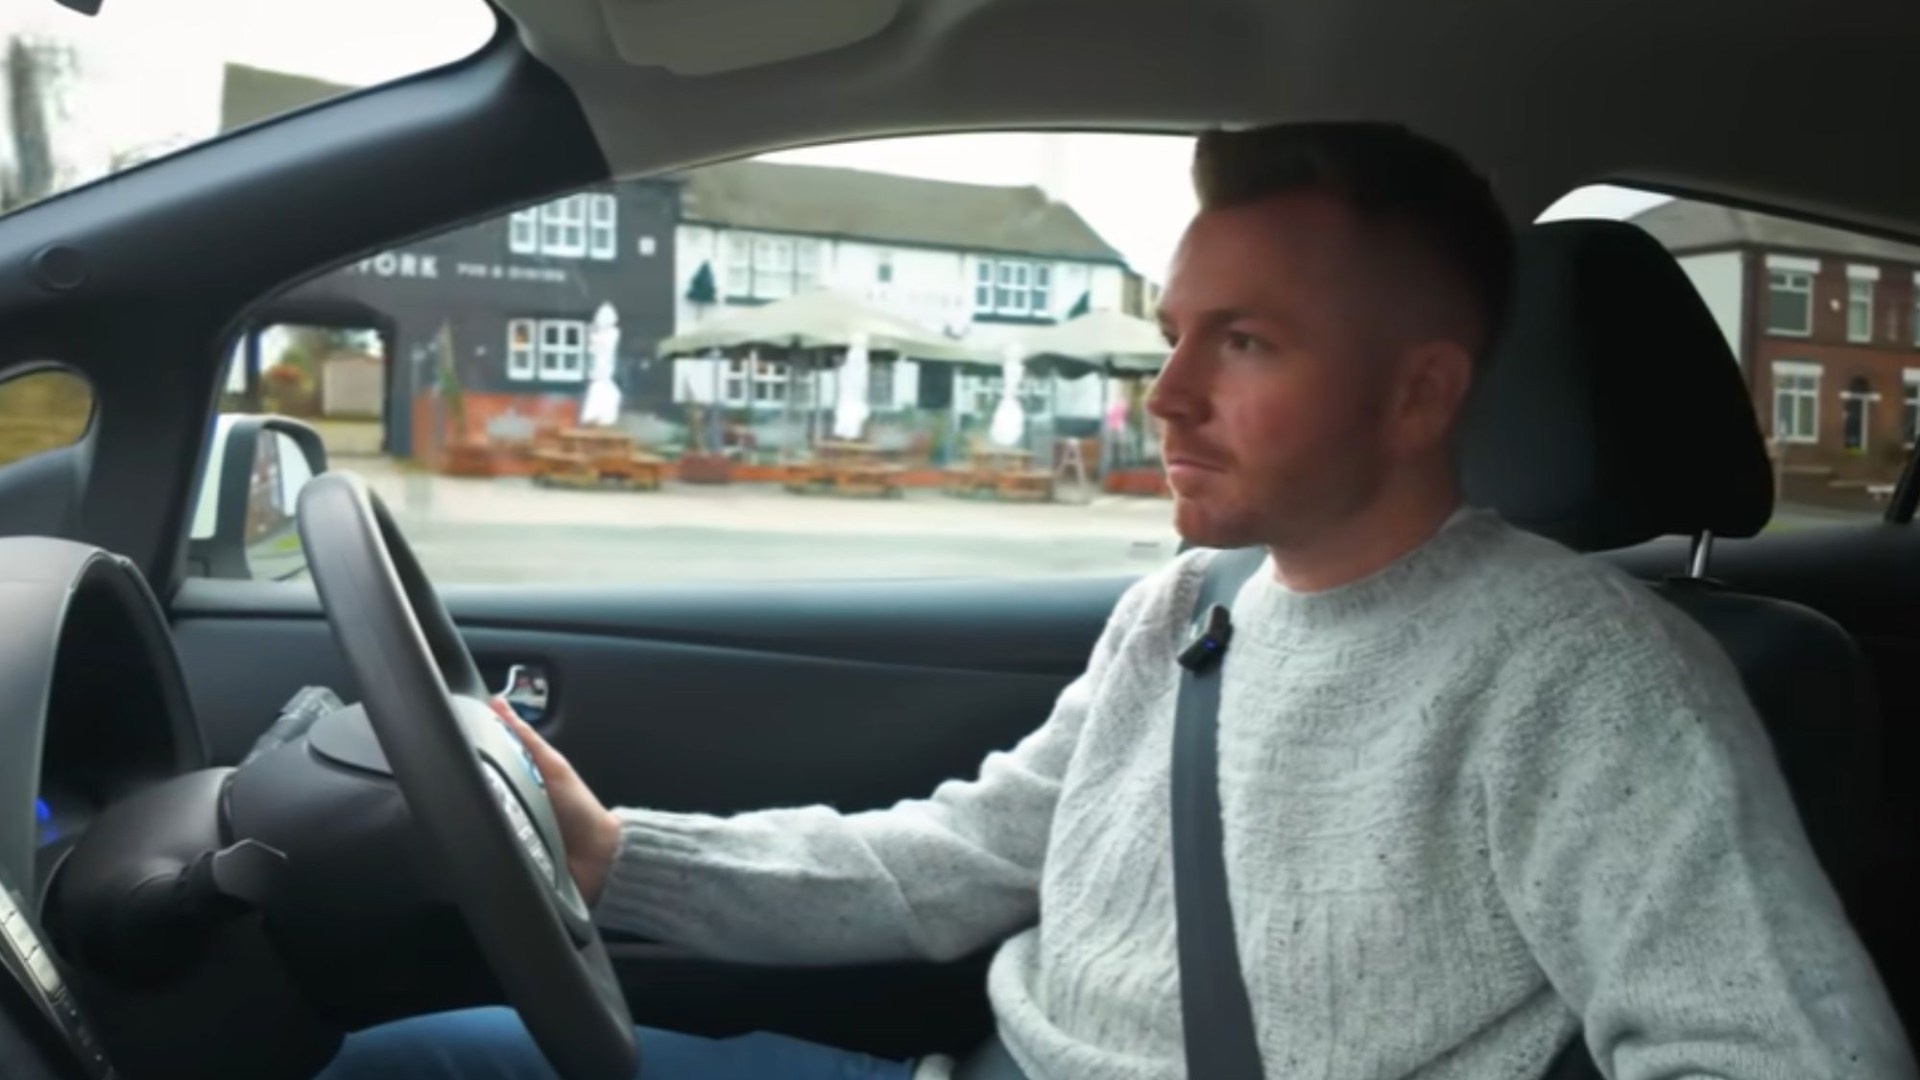 It’s smooth, quite quick & silent – car expert urges drivers to pick up EV thats perfect for the city at just 4k [Video]